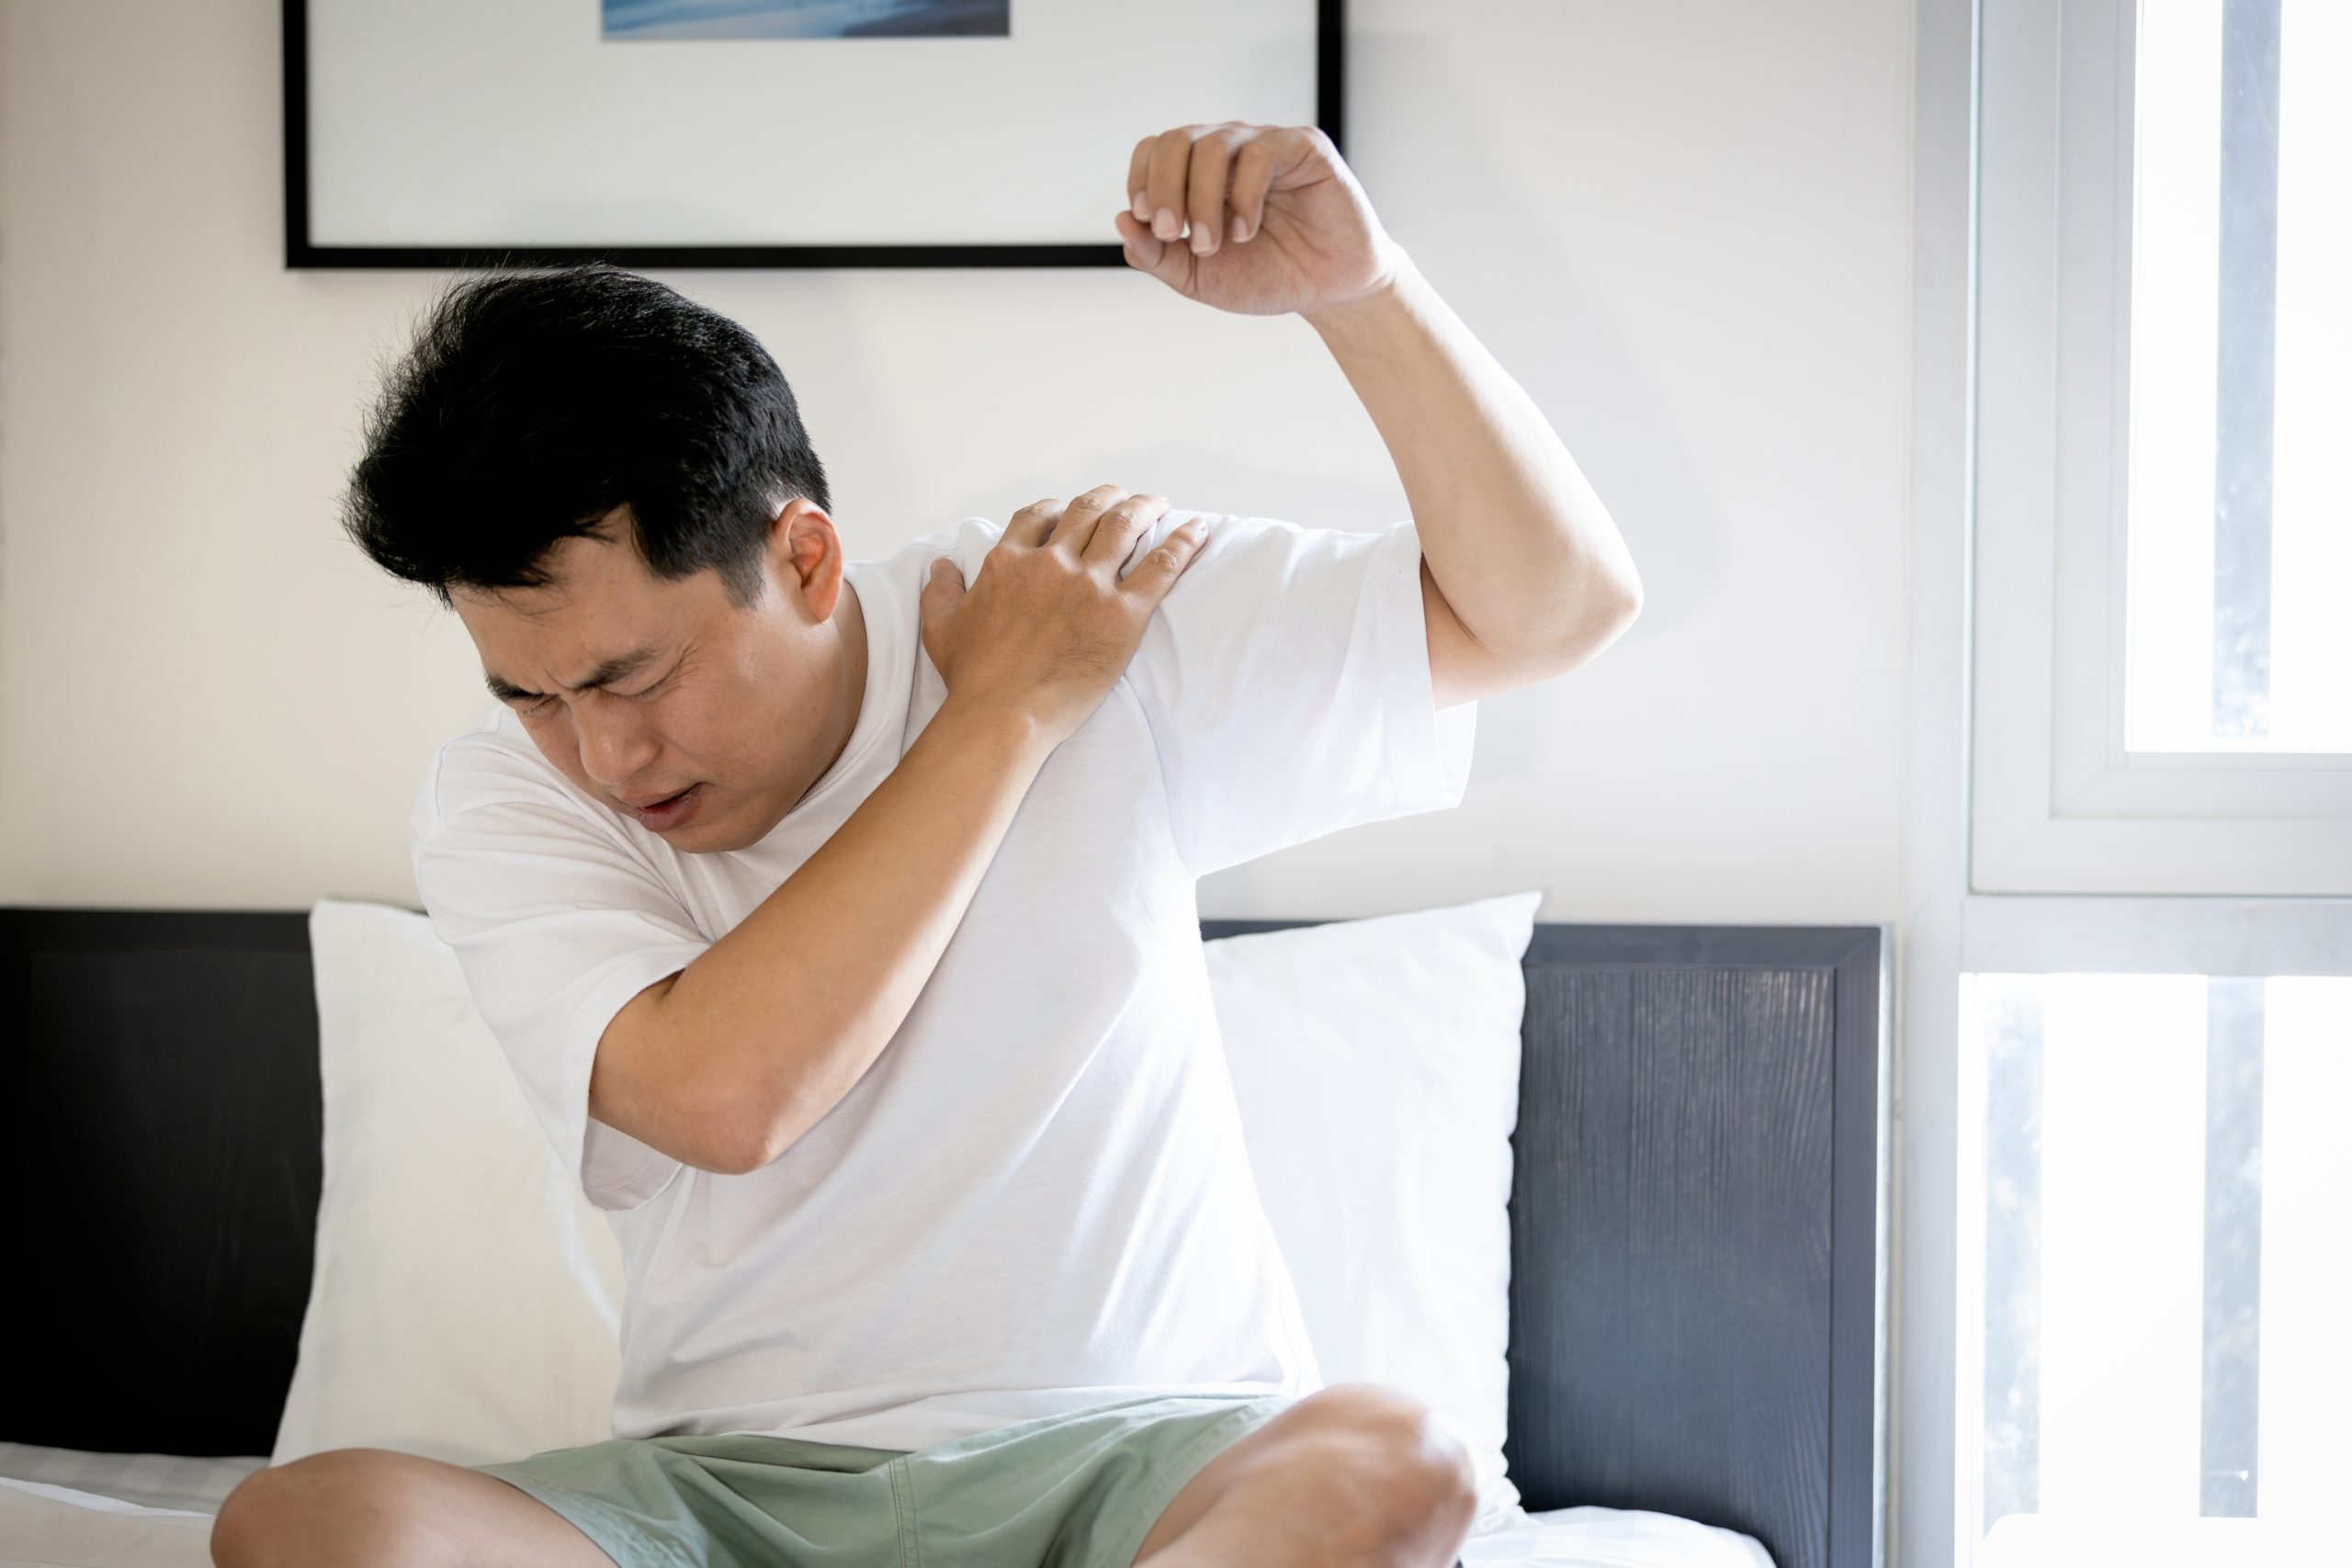 Chiropractic Care For Shoulder Pain Near Maltby, WA